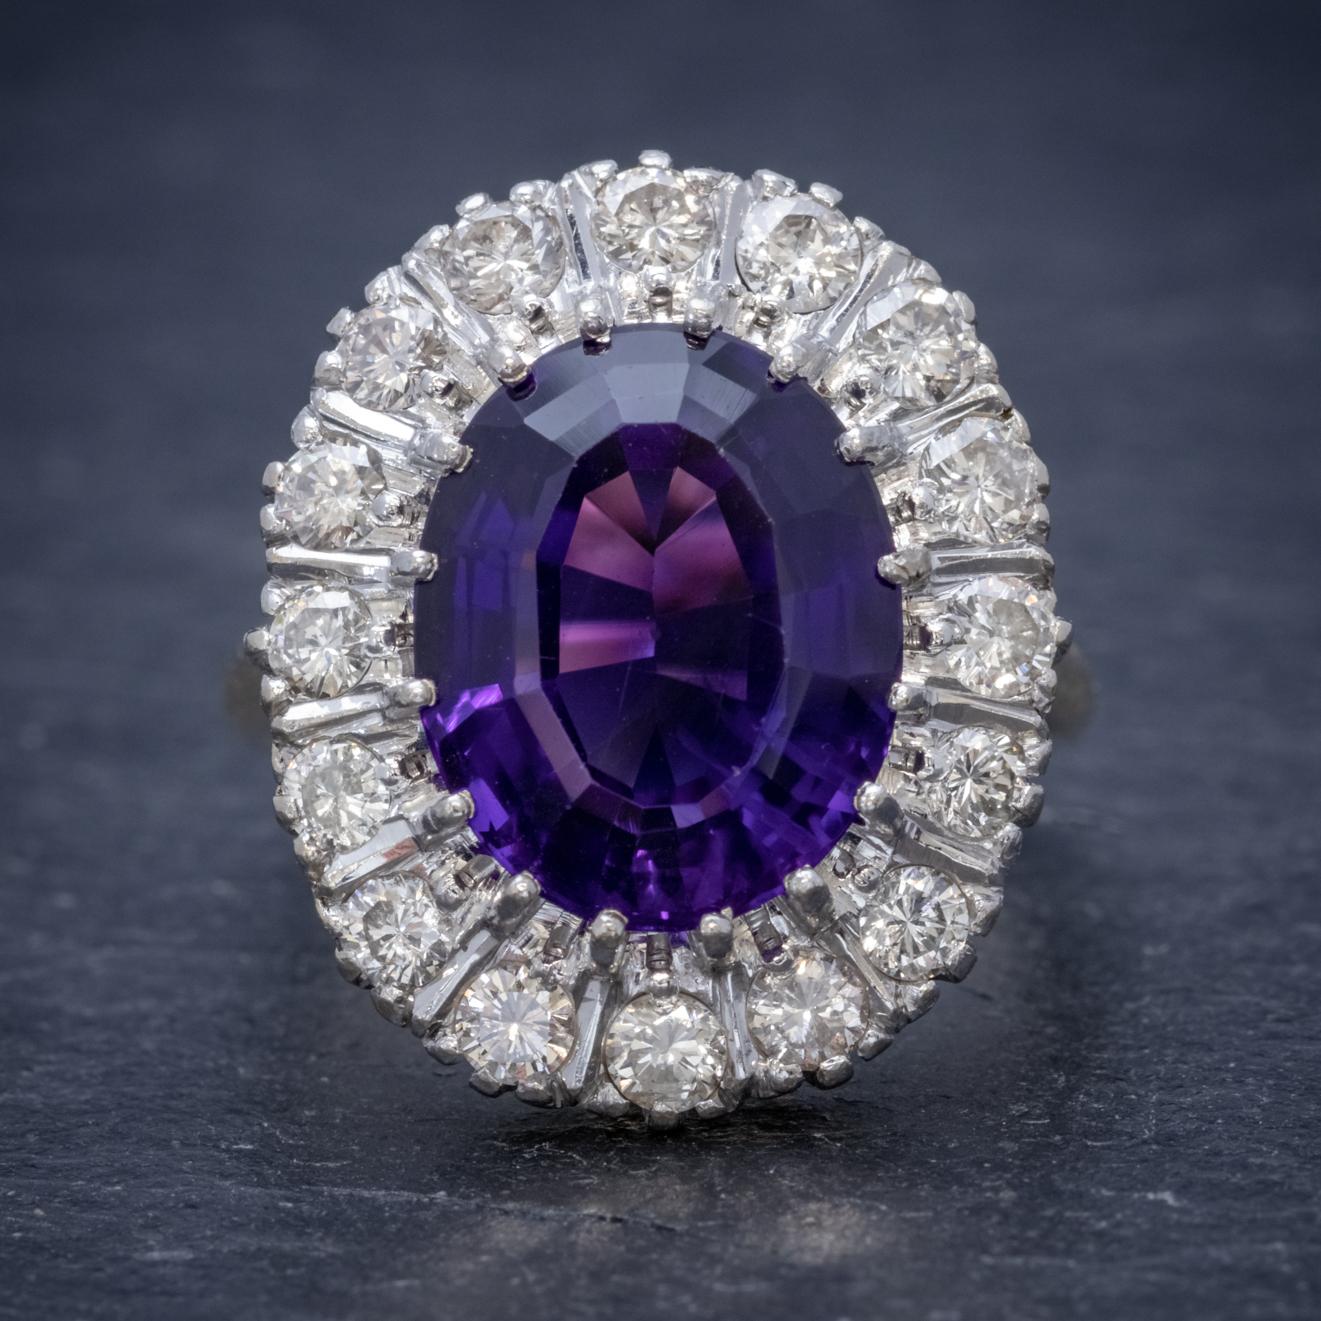 A spectacular Art Deco ring claw set with a beautiful deep purple Amethyst which is over 6ct and haloed by sparkling Diamonds which total to approx. 1.30ct.  

The stones are set in a large 18ct White Gold face and fitted to an 18ct Yellow Gold